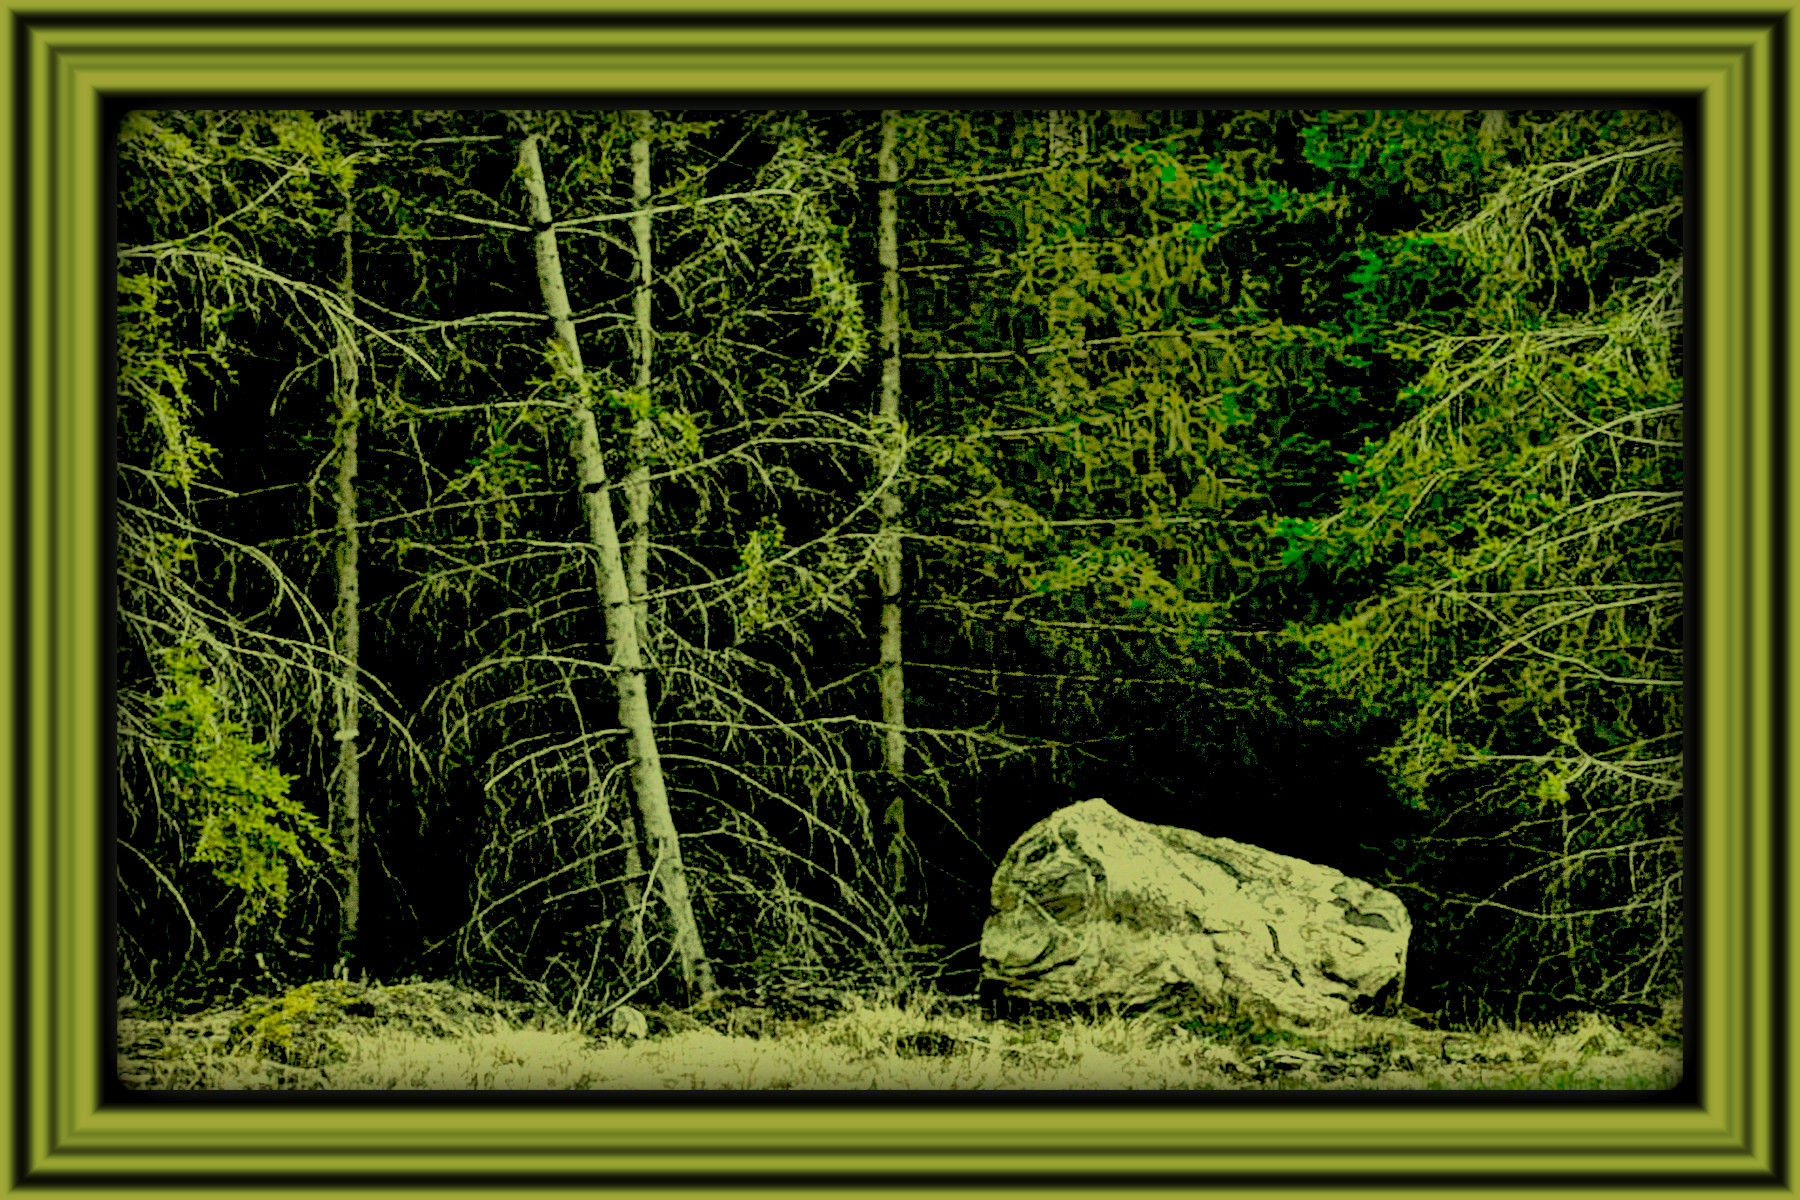 2024-03-28 09-52-26 a_stone_in_the_forest___stock_by_ravenslane_dh3u9fz-414w-2x with Lines Art effect, preset=3000,35.0,3.5,Pen Drawing,1,[138,151,46],0,1.jpg